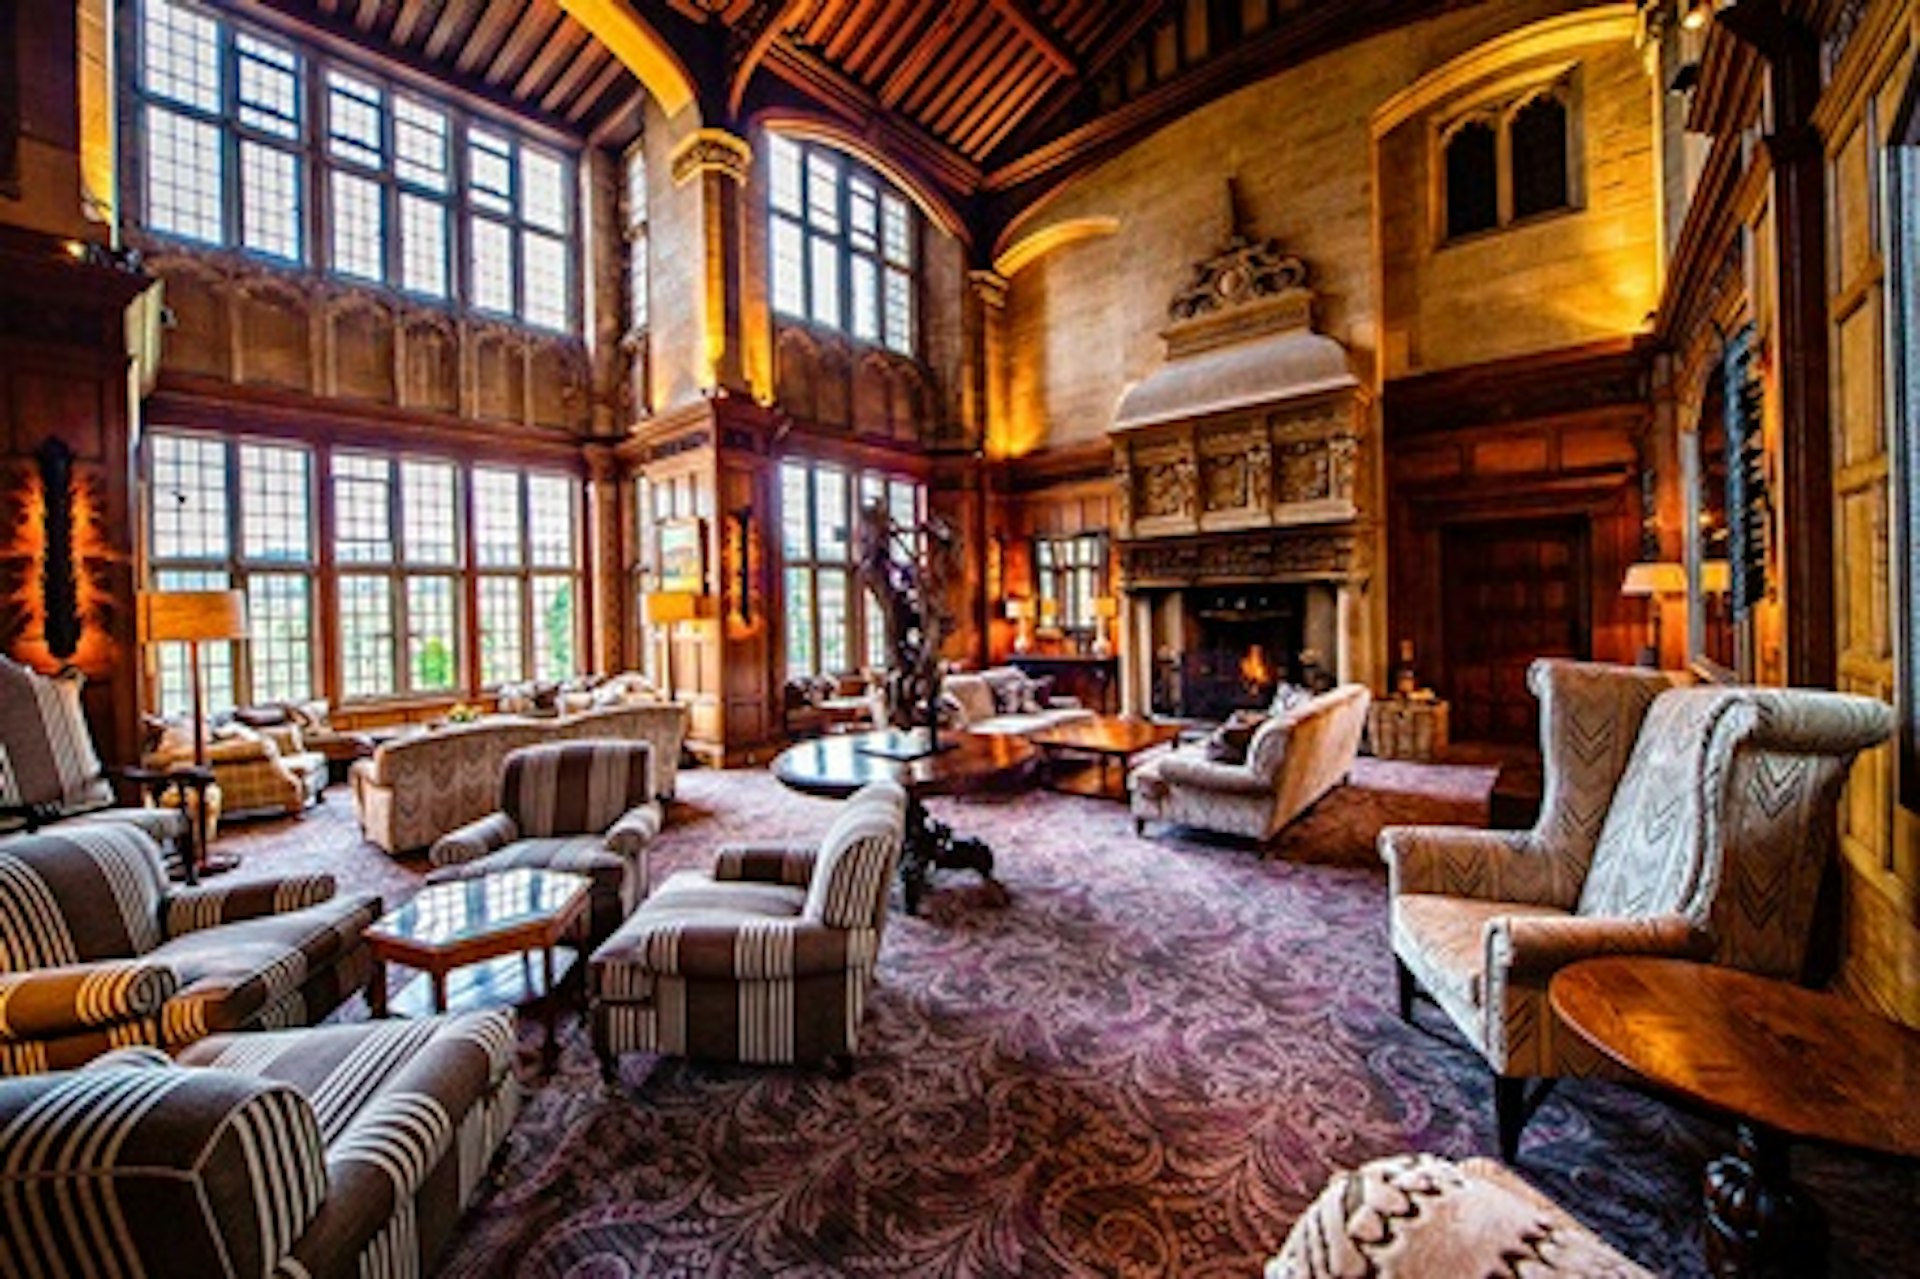 Afternoon Tea for Two at Bovey Castle 3